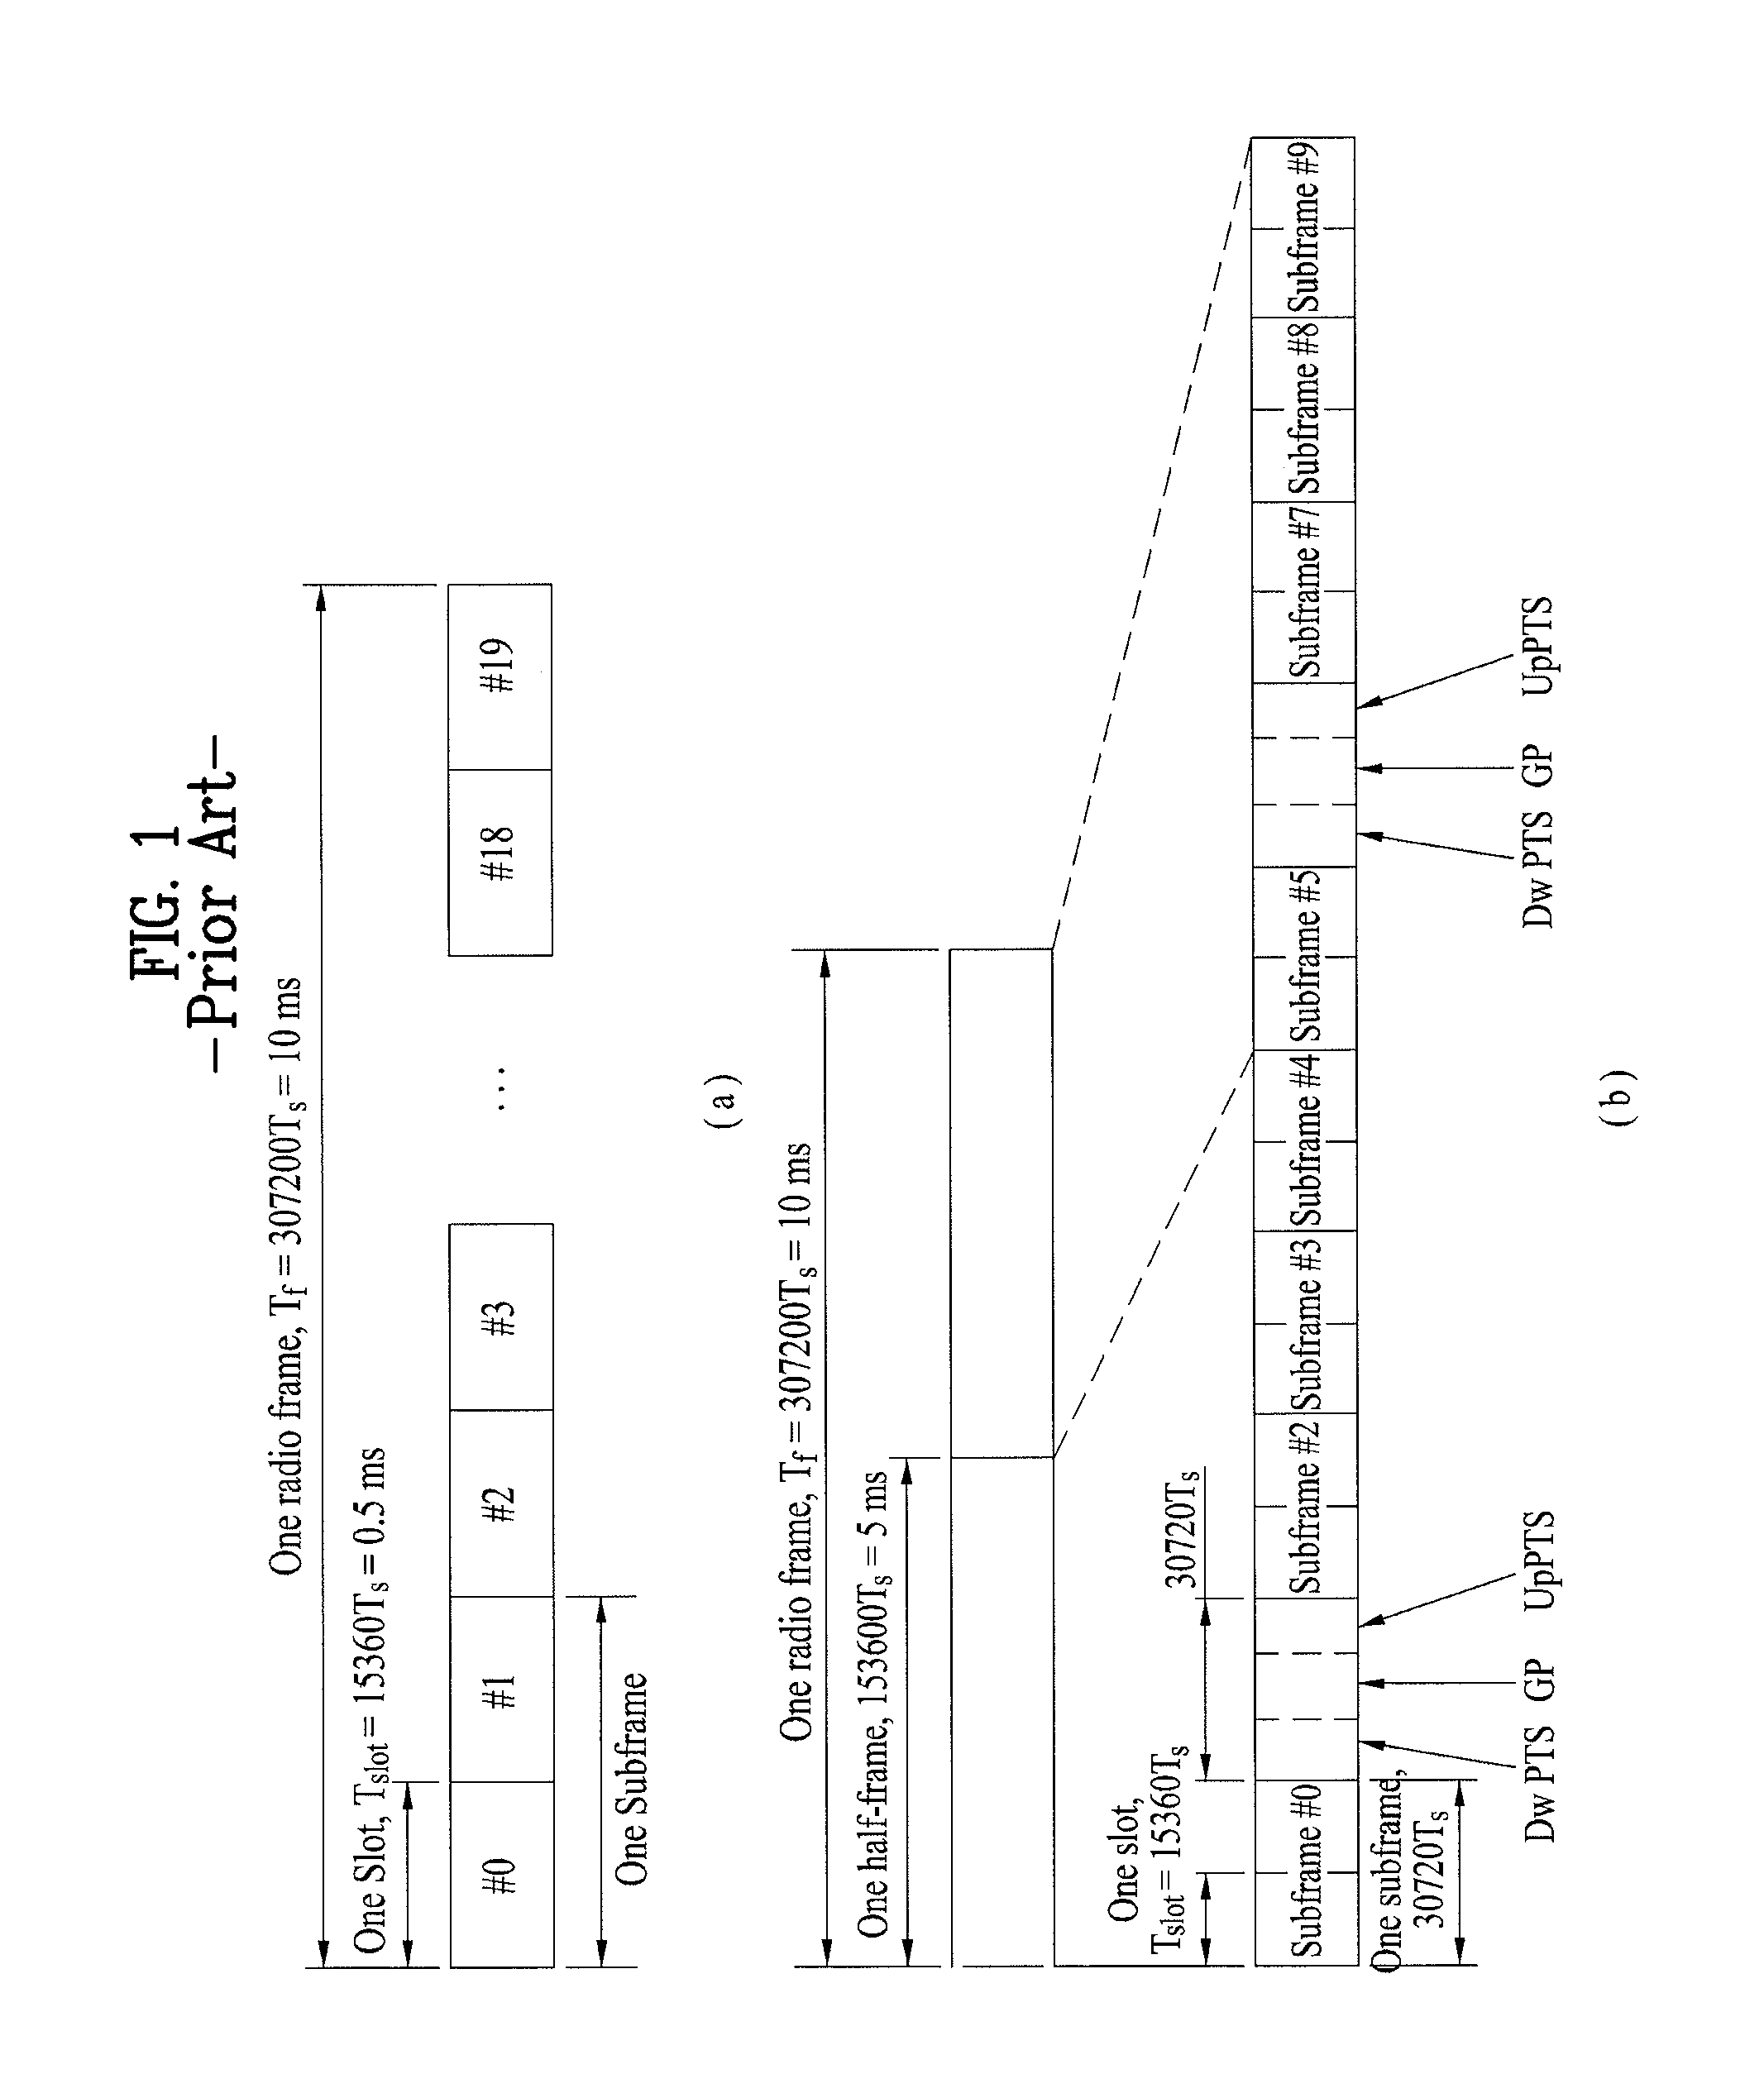 Methods for measuring and transmitting downlink signals and apparatuses therefor